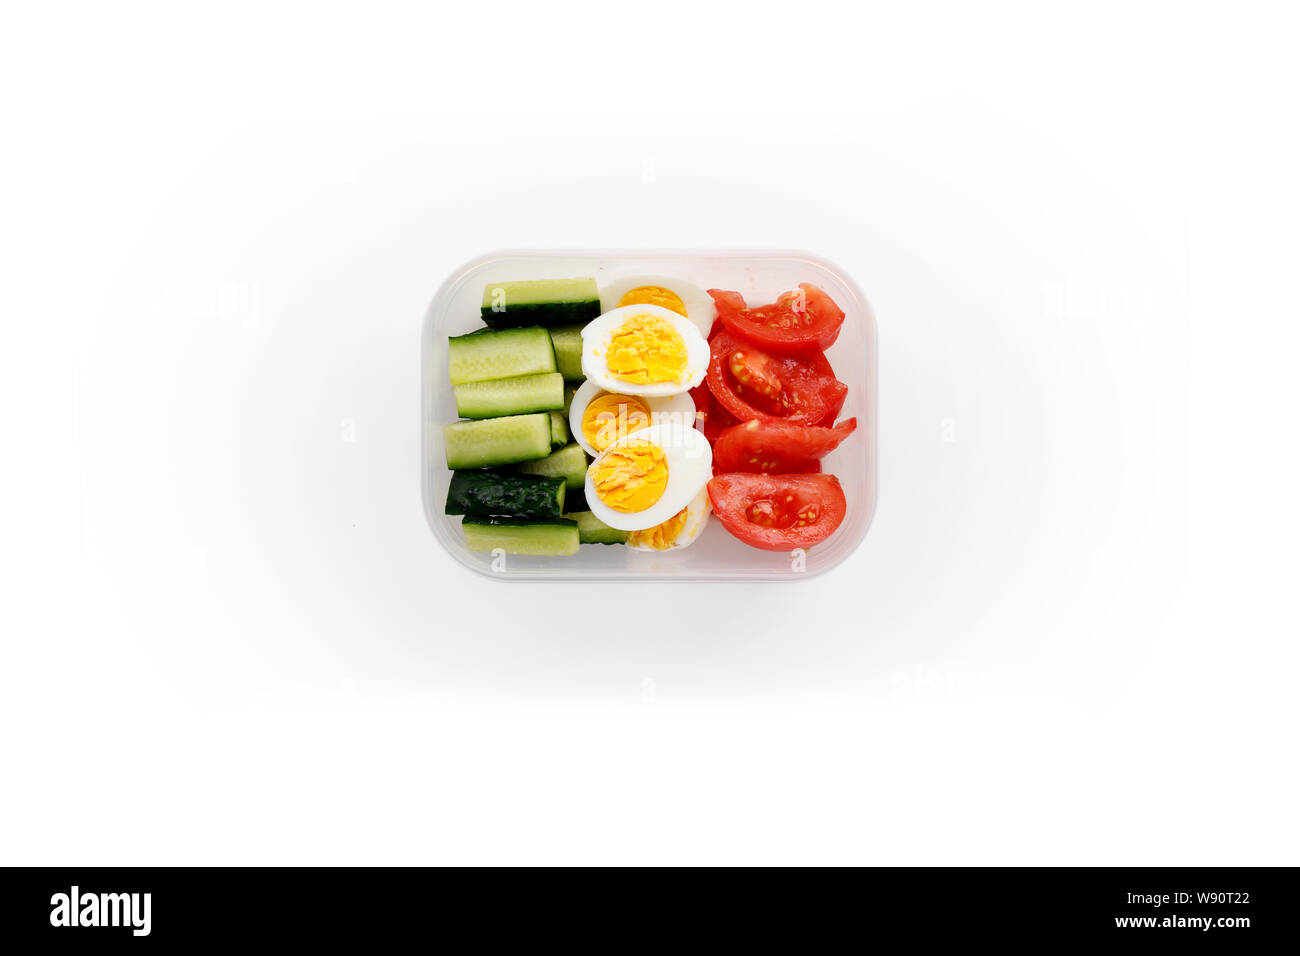 Healthy fitness food in container. Sport food minimalism Stock Photo